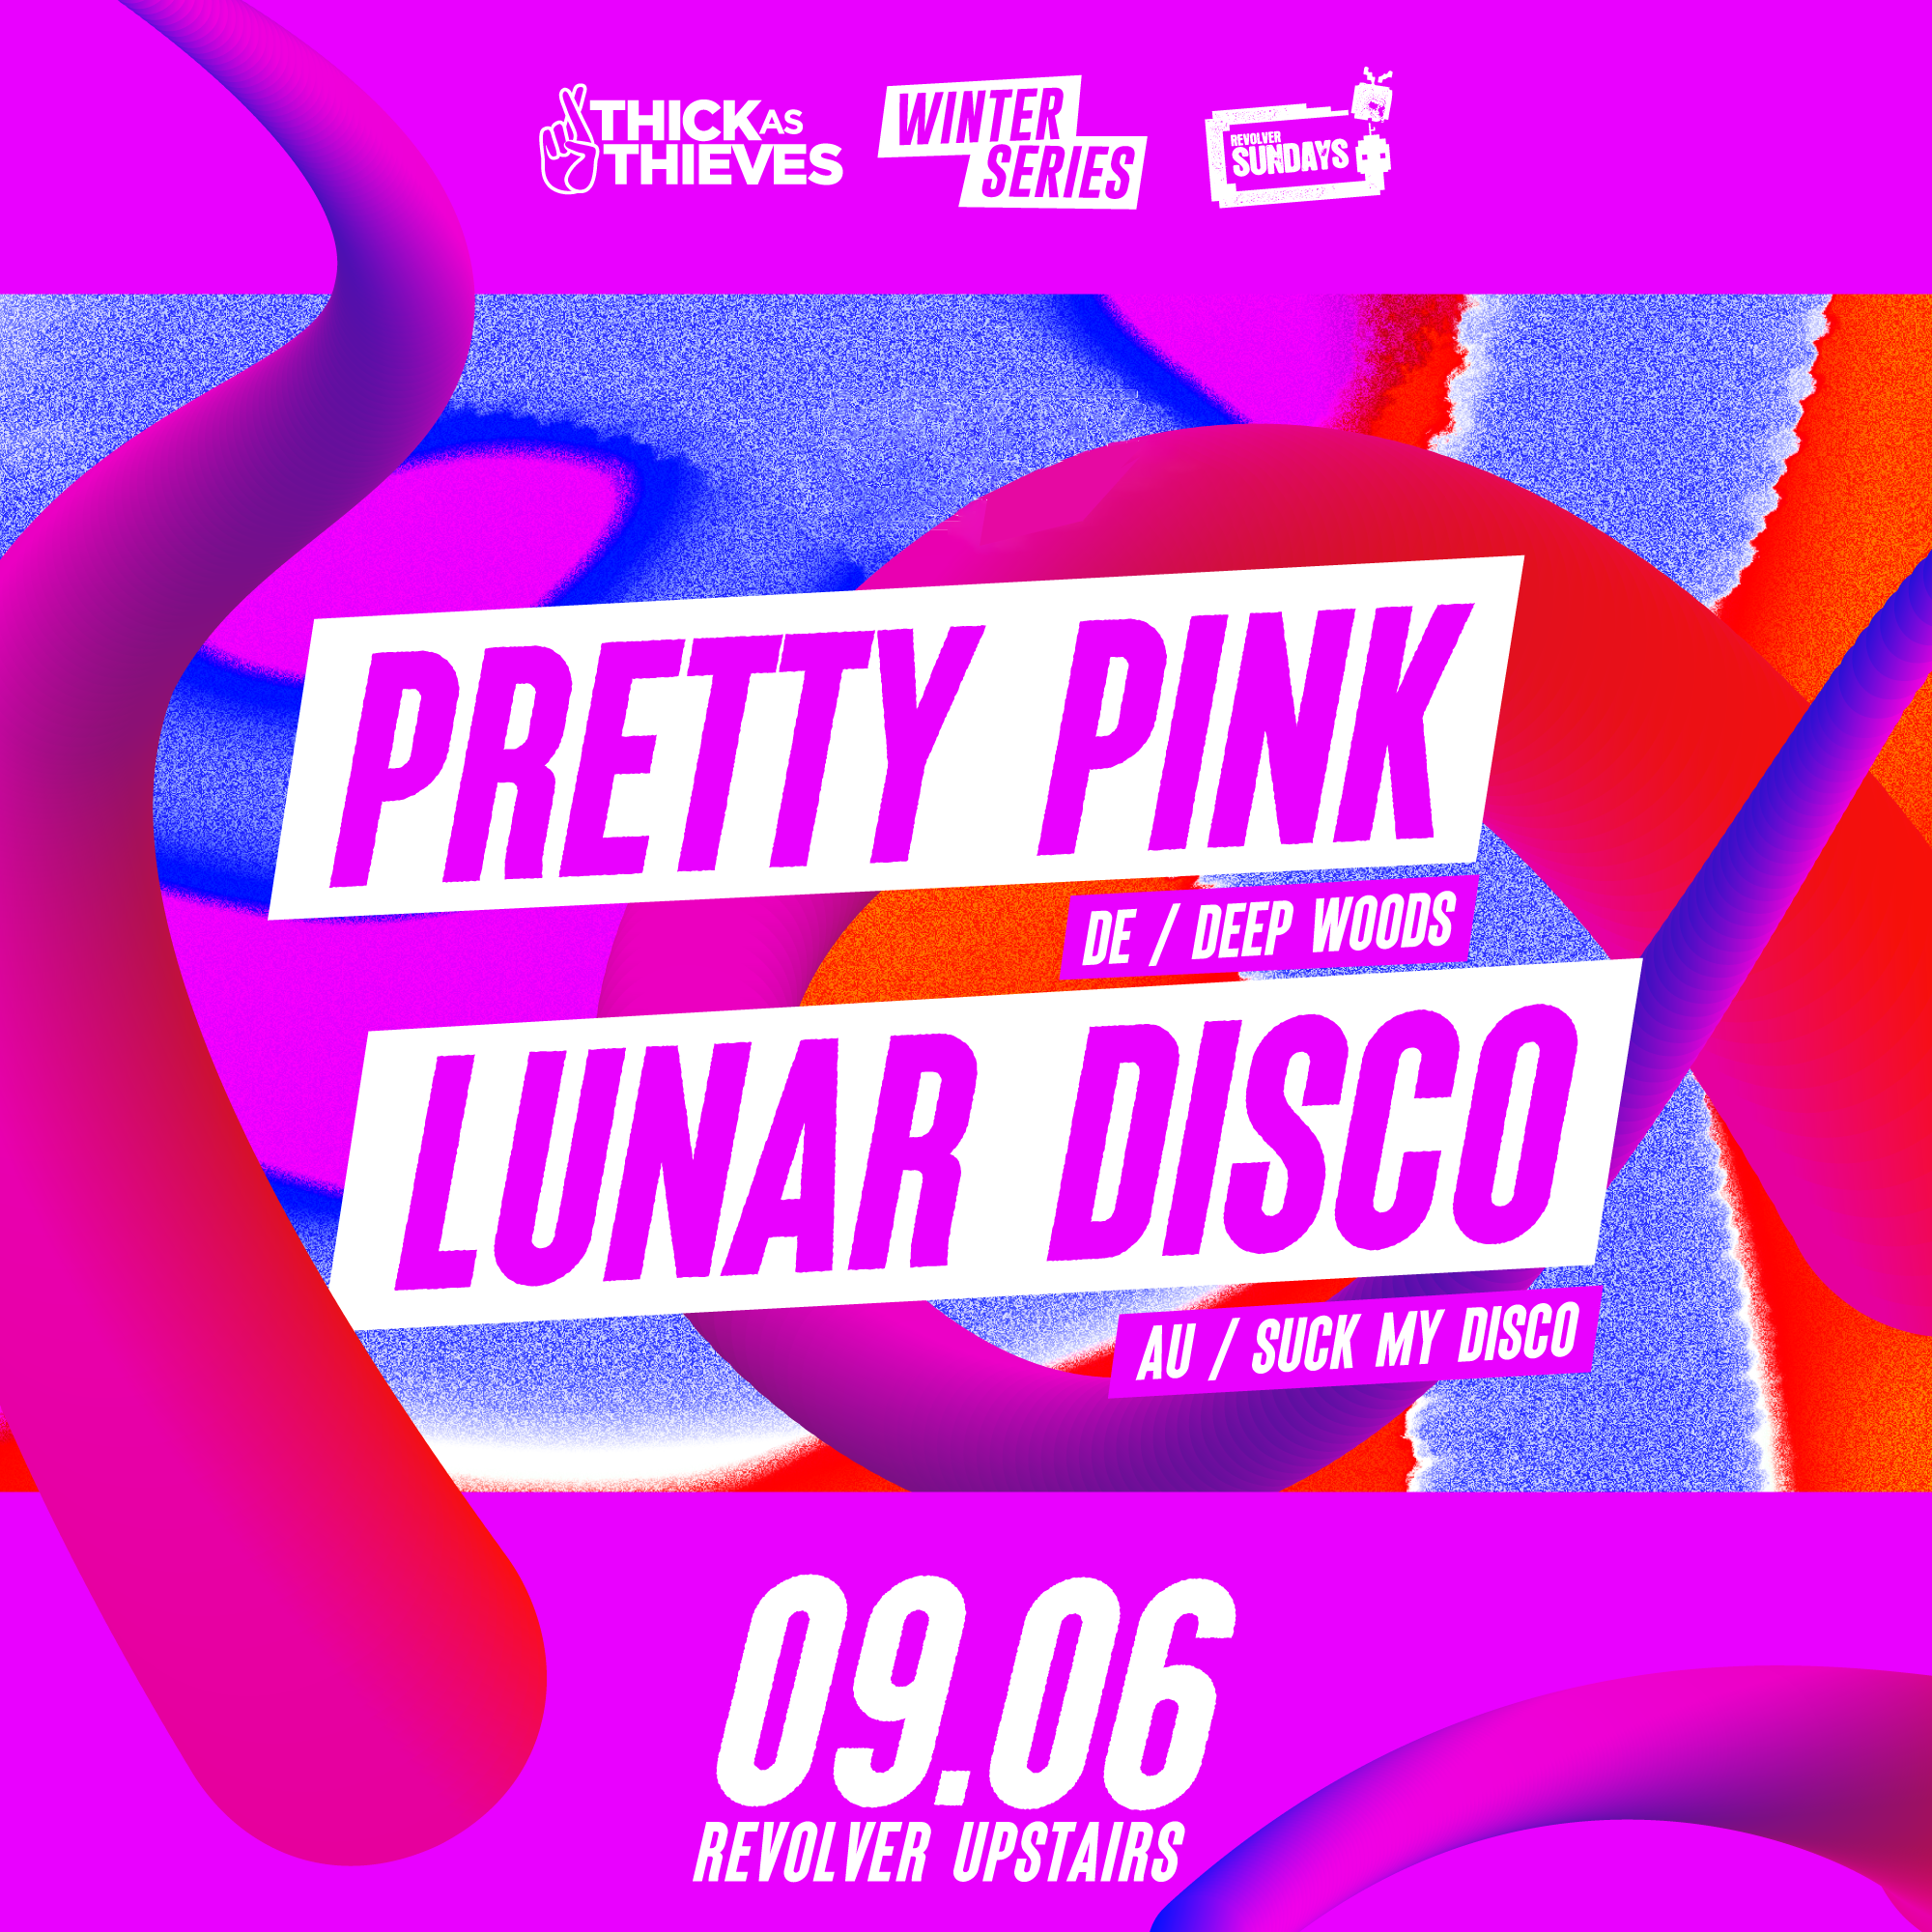 Thick As Thieves pres. Winter Series - Pretty Pink & Lunar Disco - フライヤー表